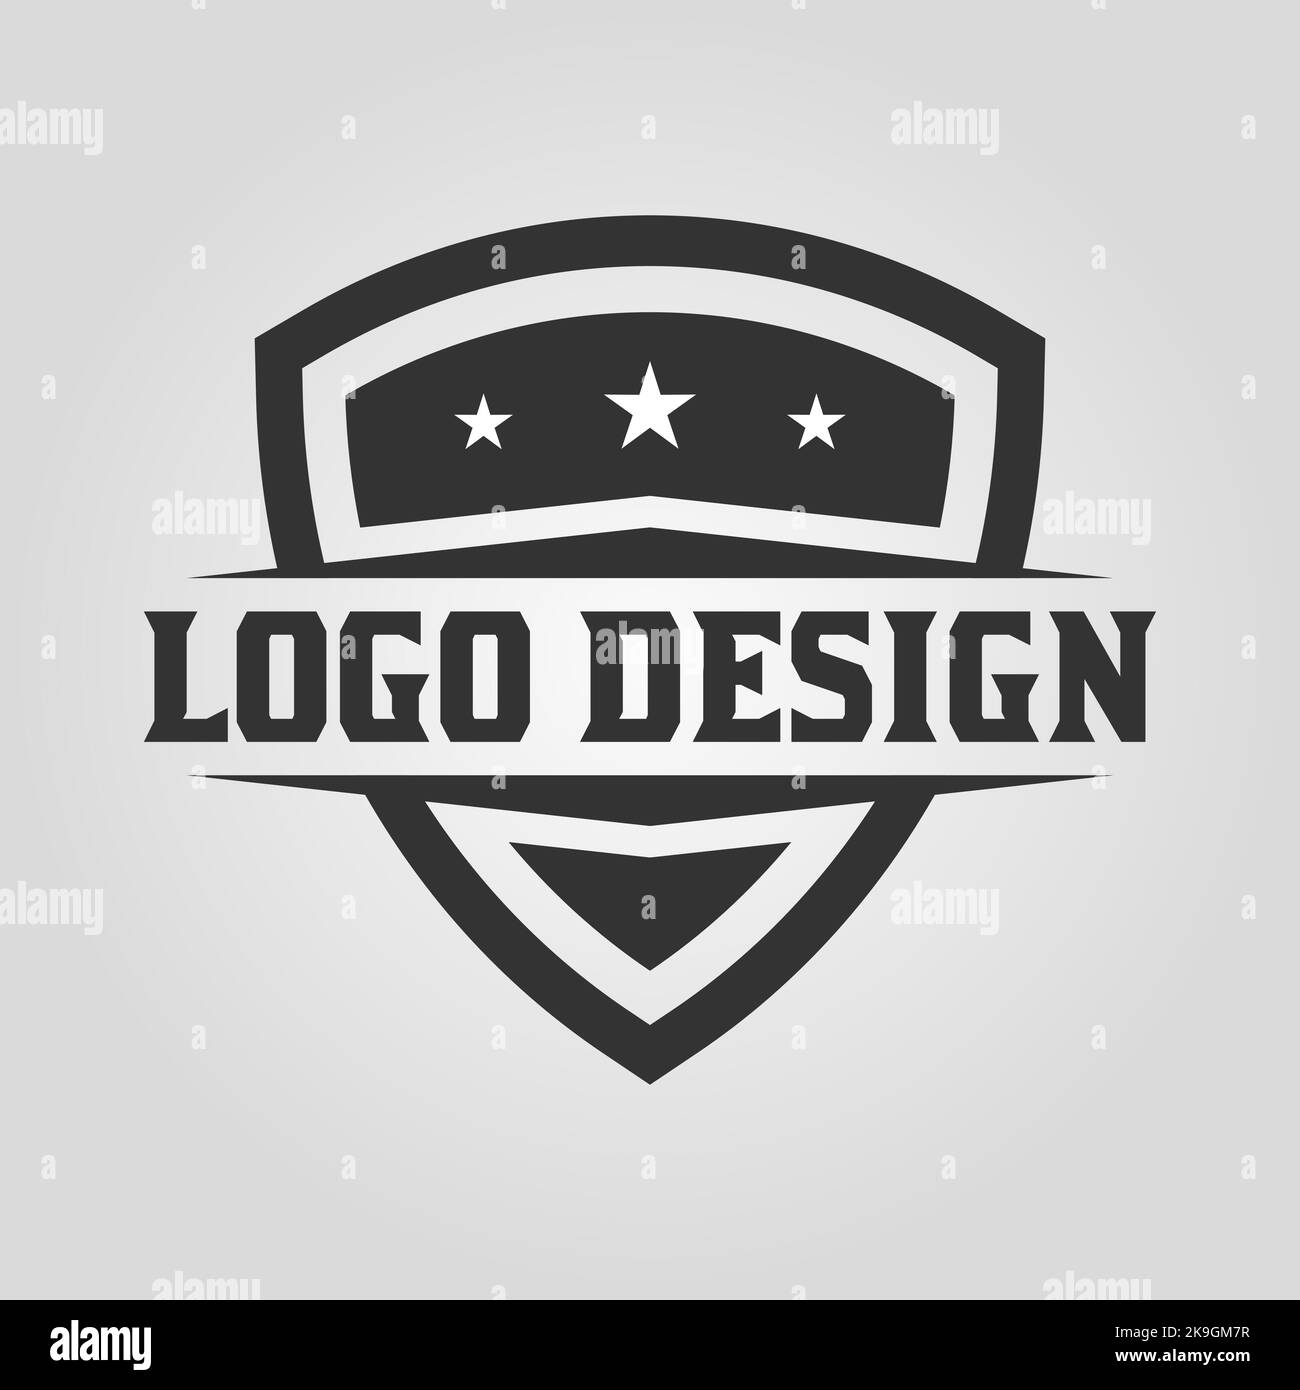 Classic logo design template with three stars. Sport team simple emblem with place for text. Retro shield shaped monochrome badge. Vector Stock Vector